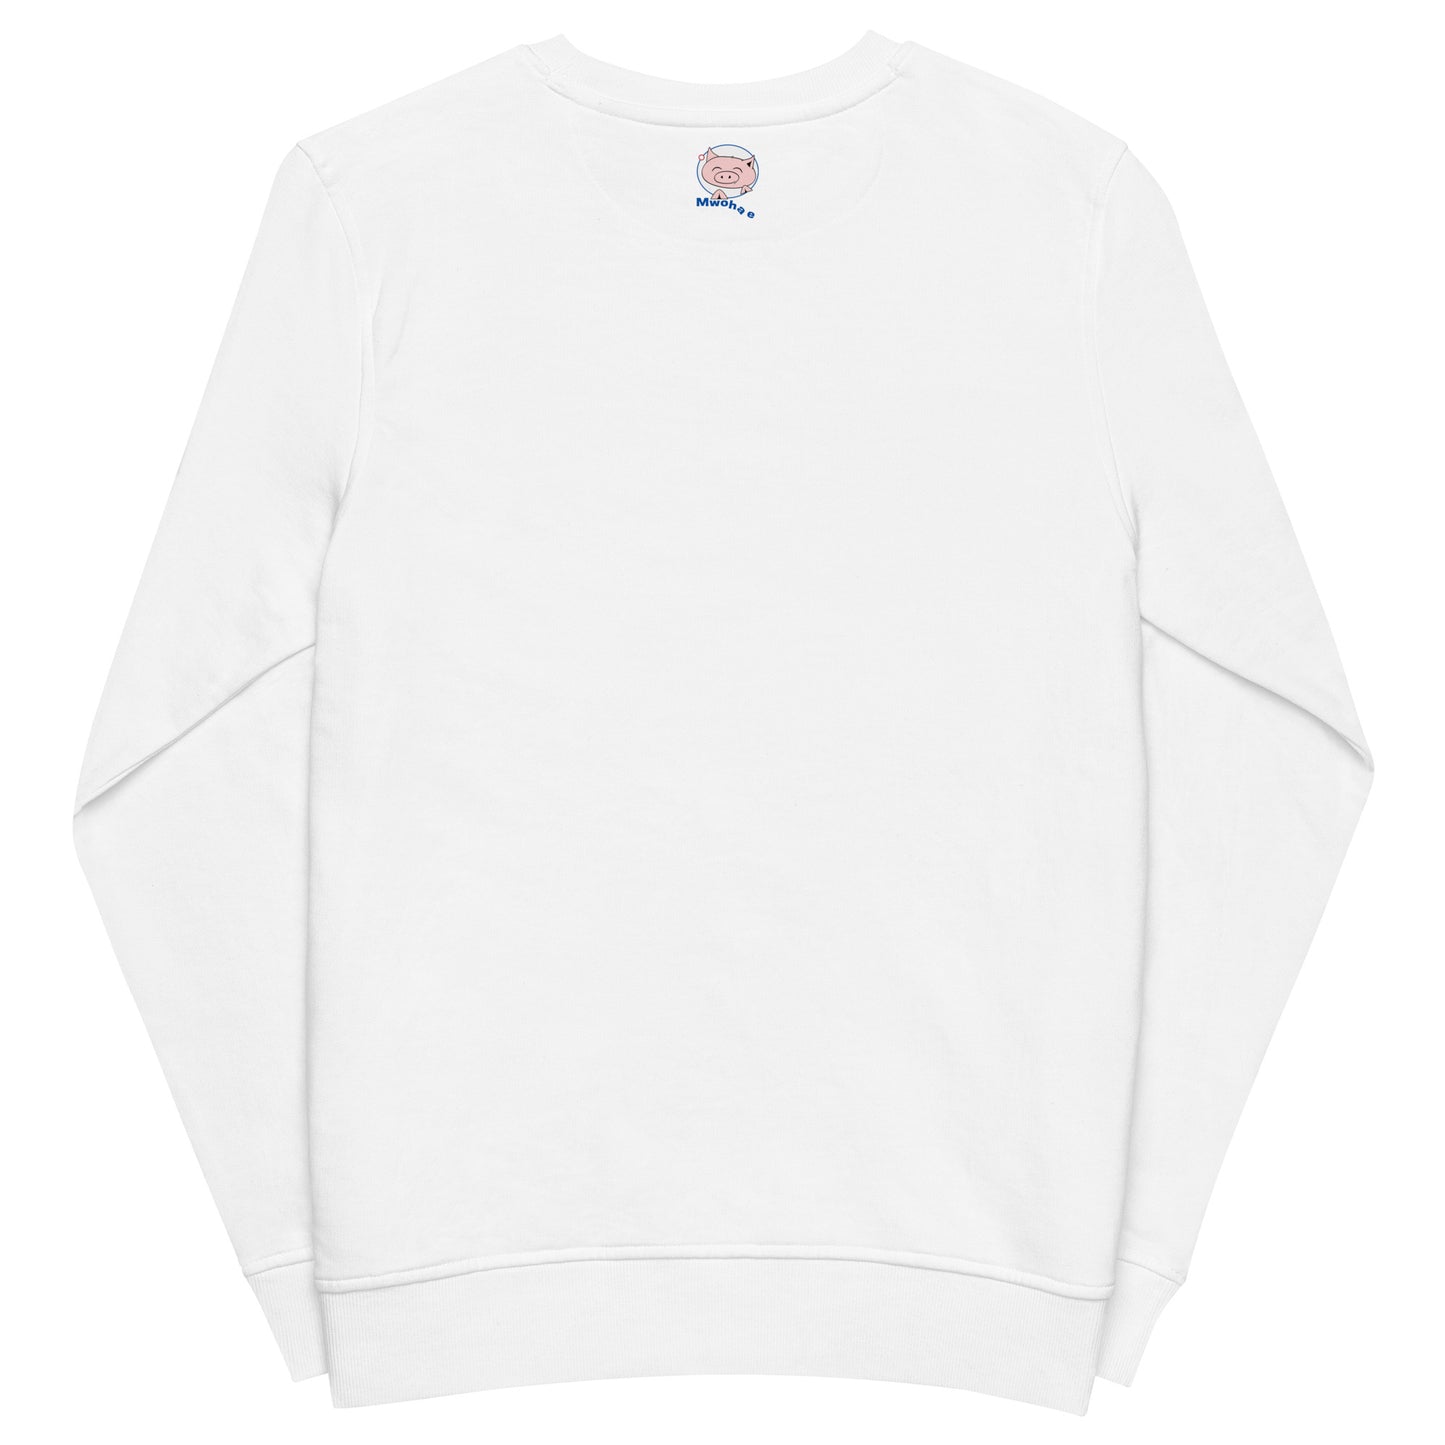 White extra soft longsleeve with small Mwohae logo on the back